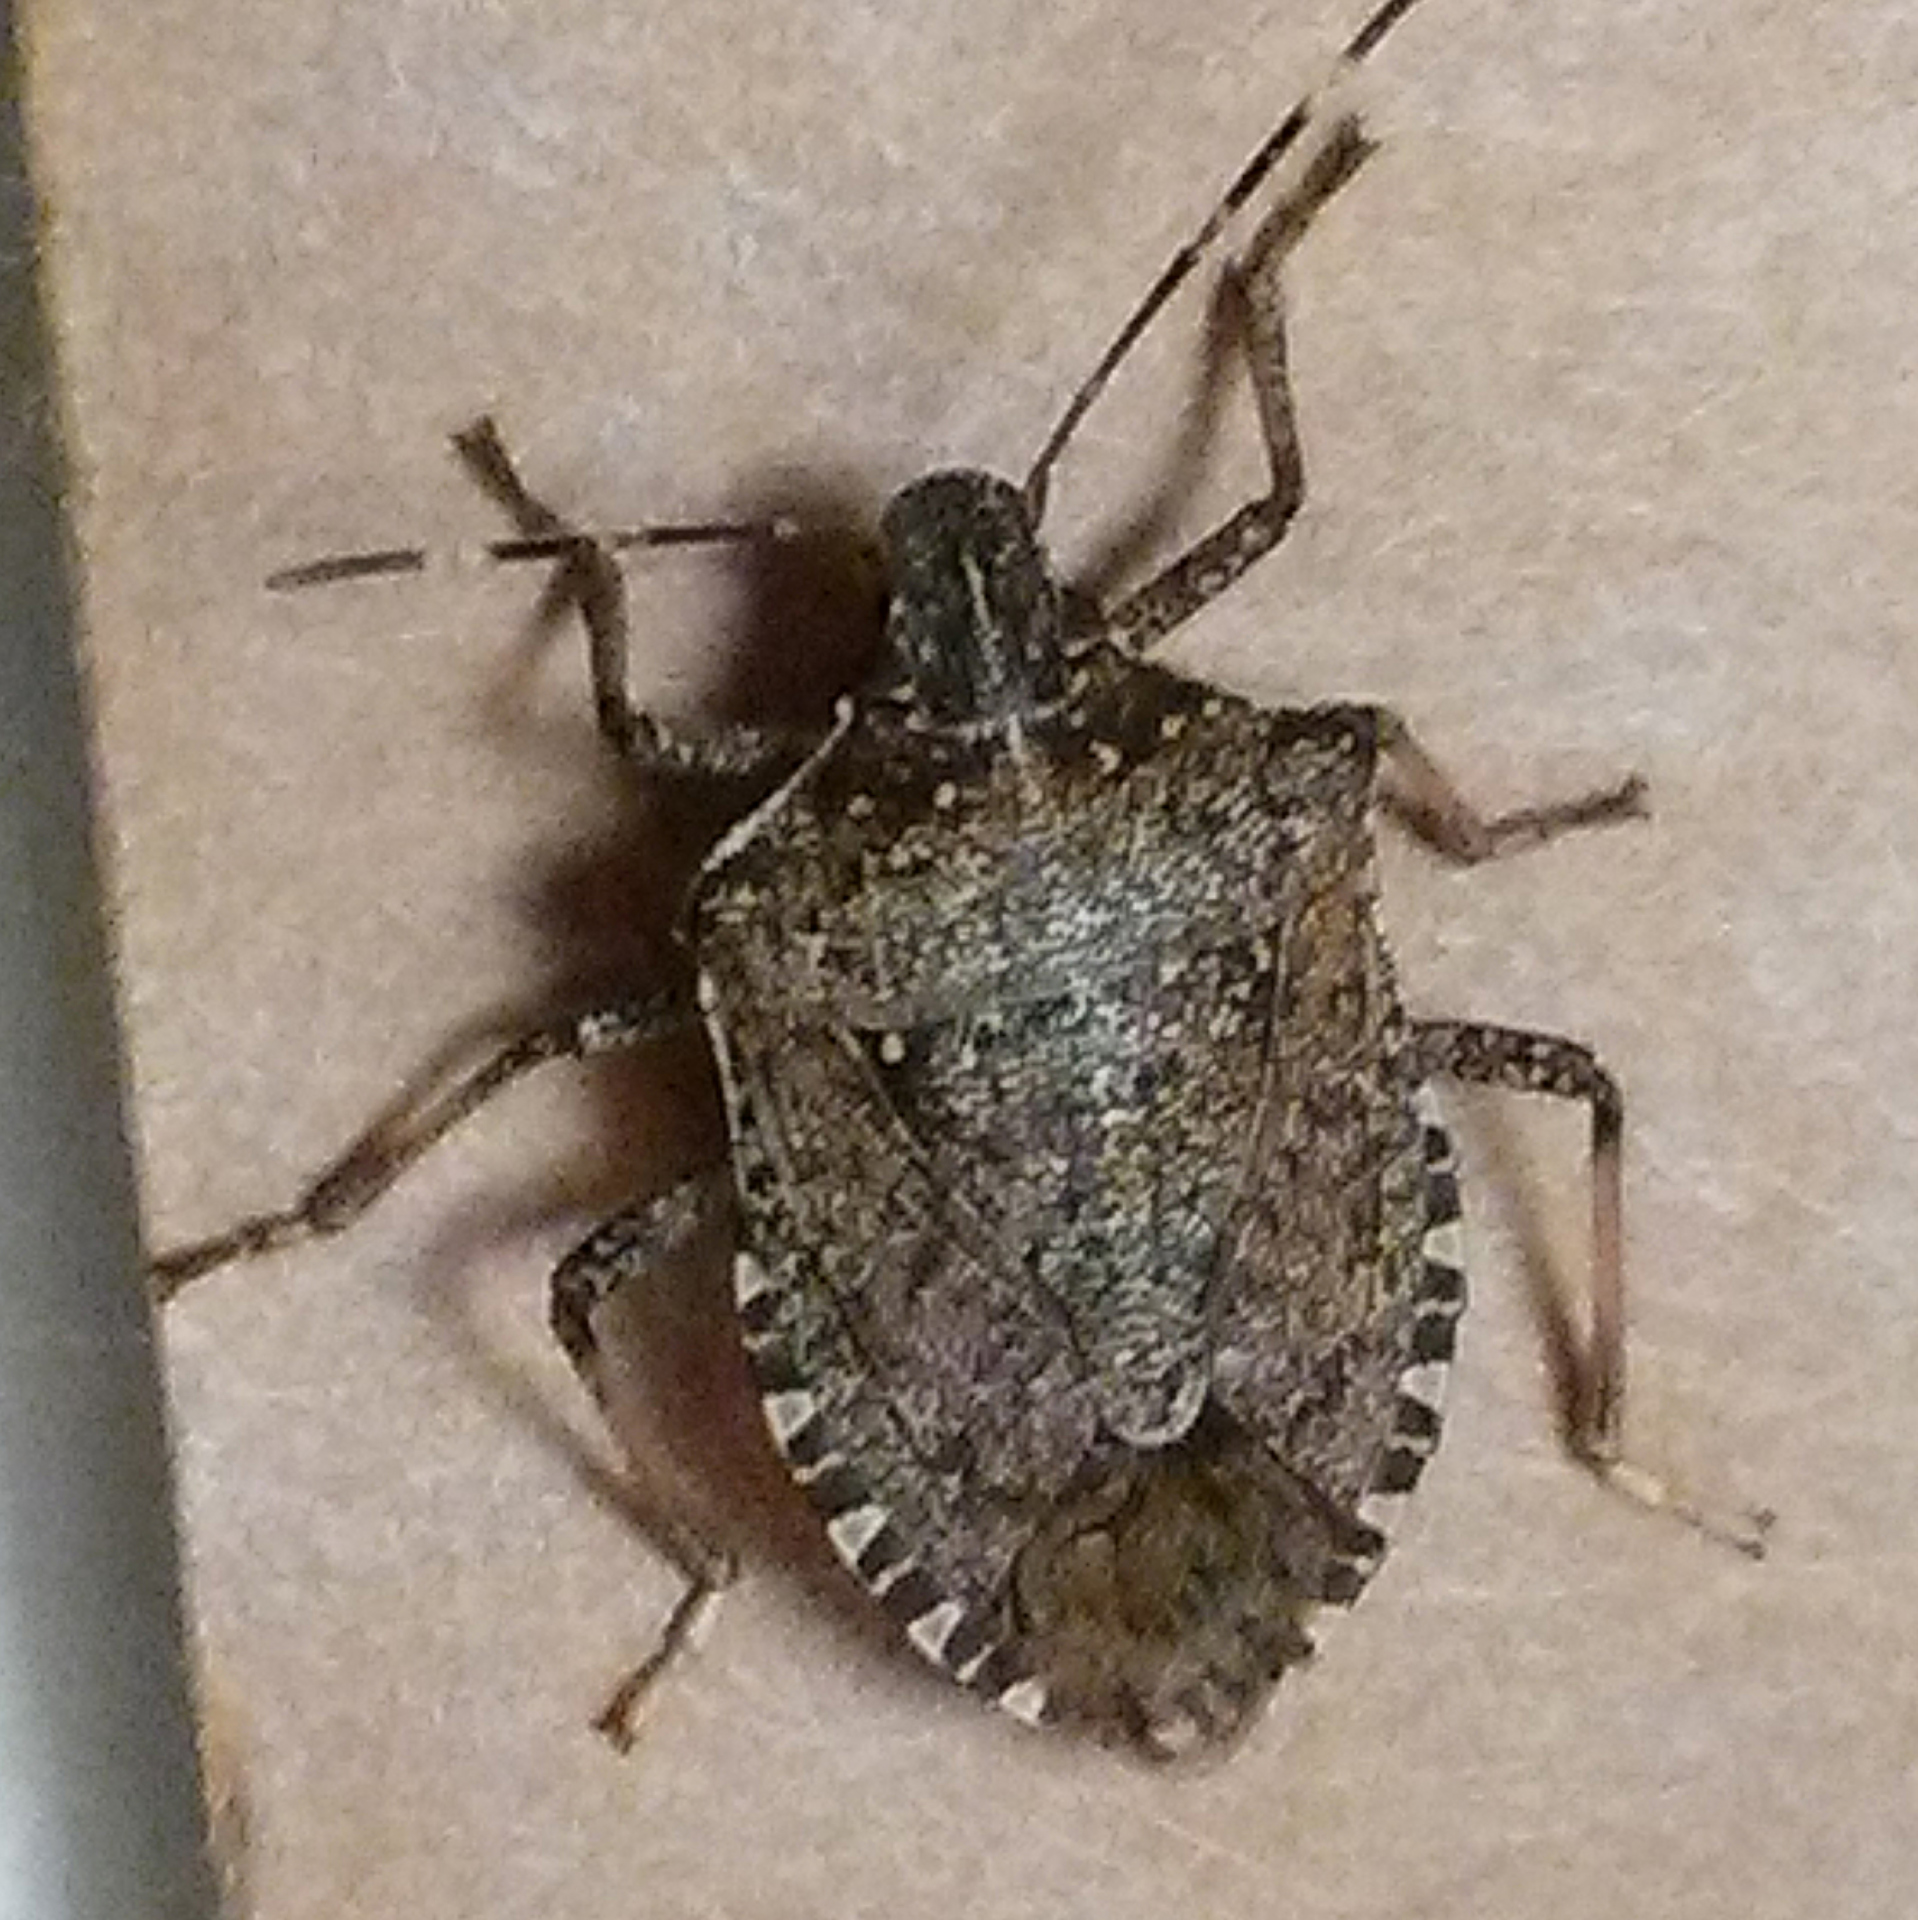 The Return of the Brown Marmorated Stink Bug